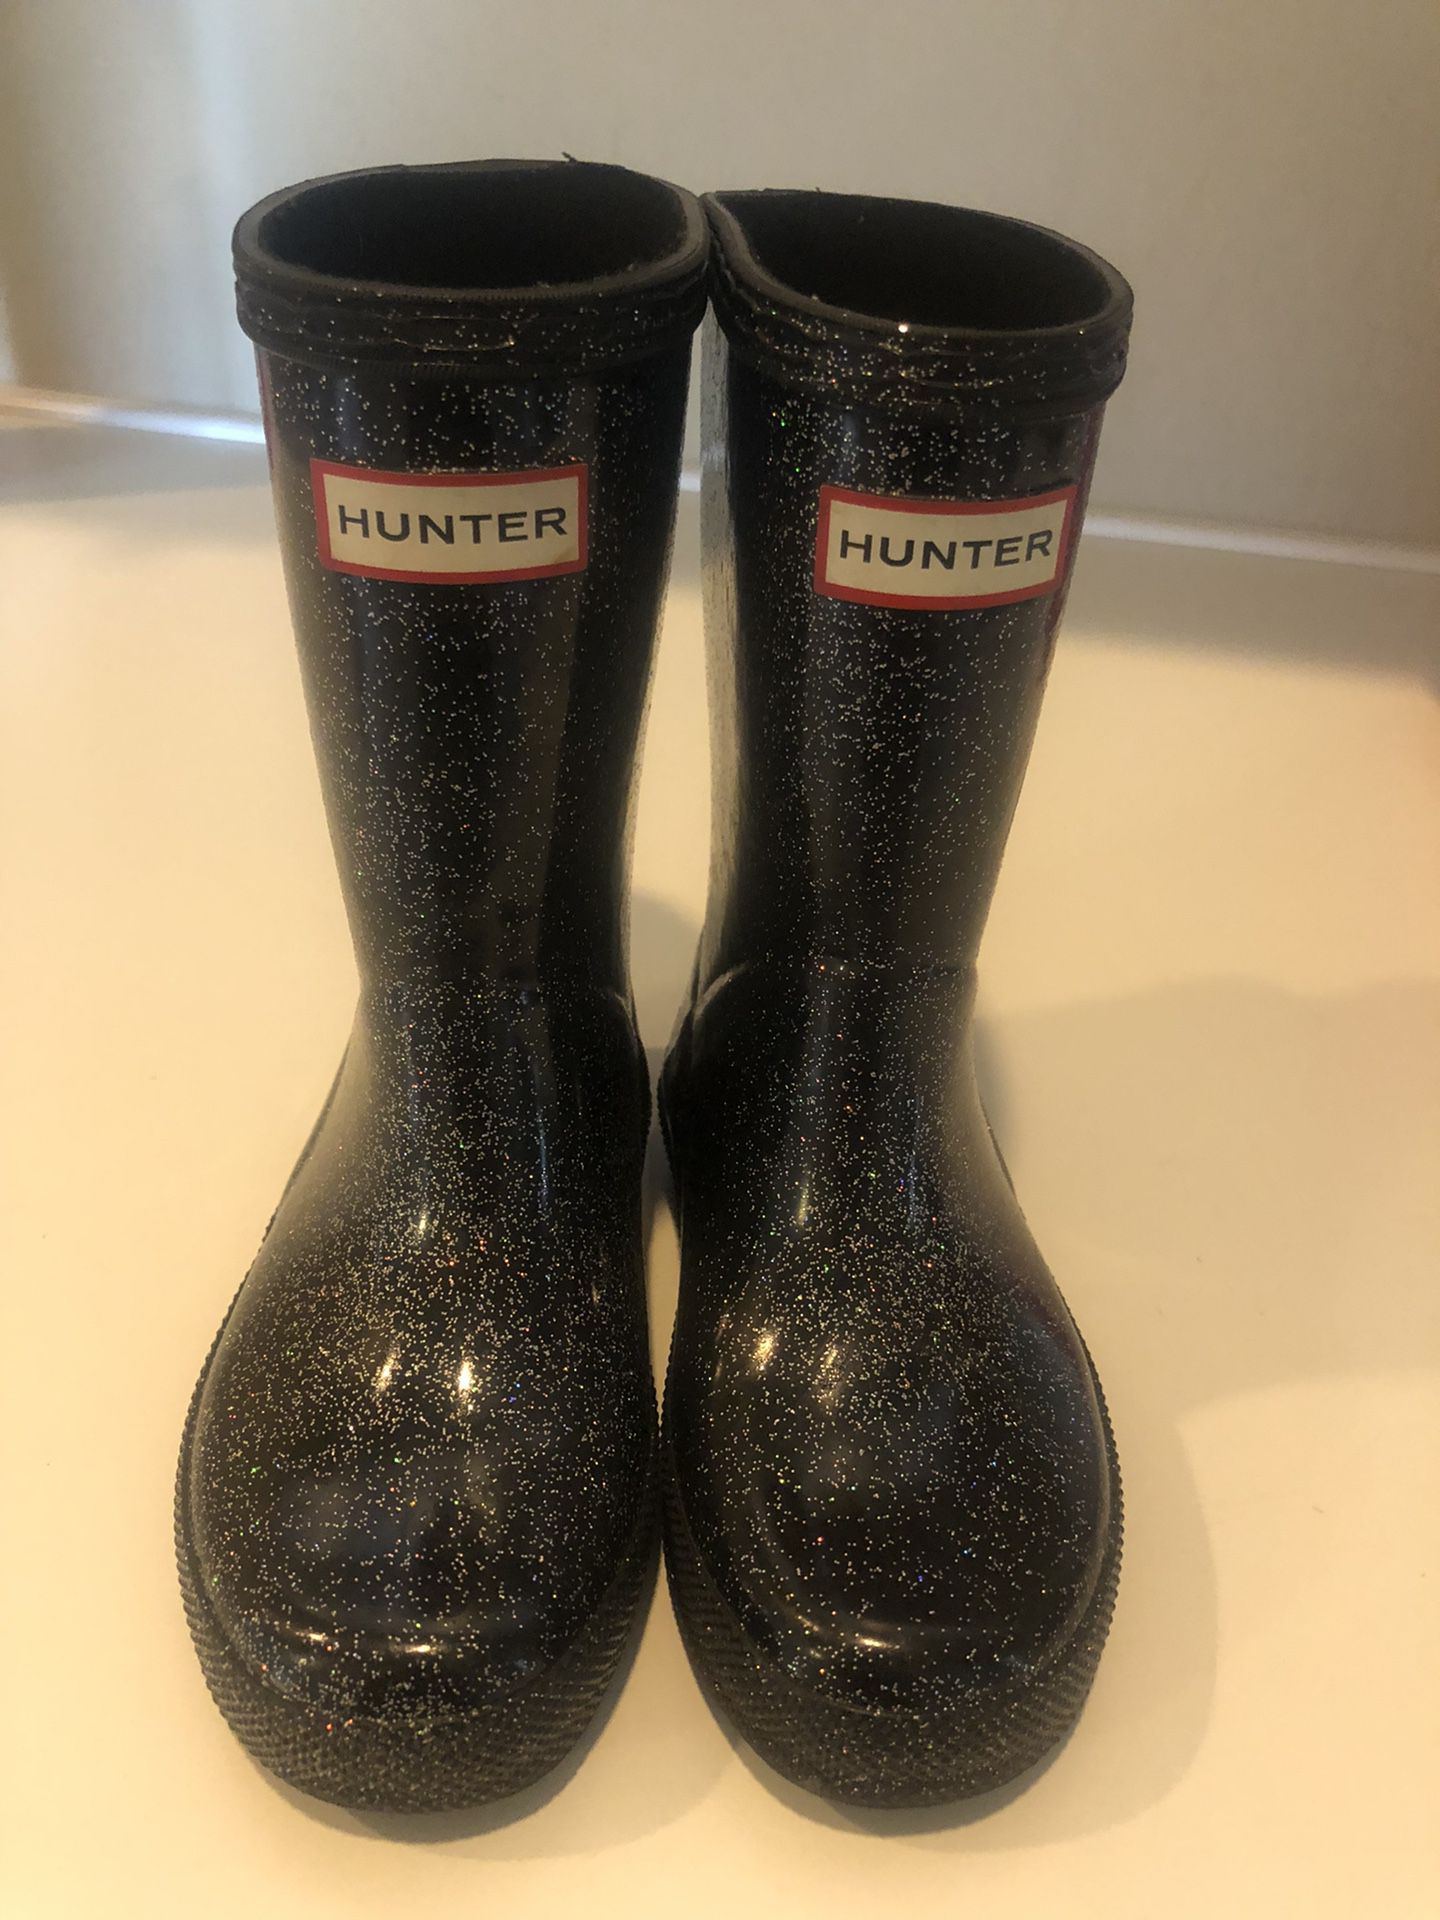 Hunter Boots for Sale Henderson, OfferUp